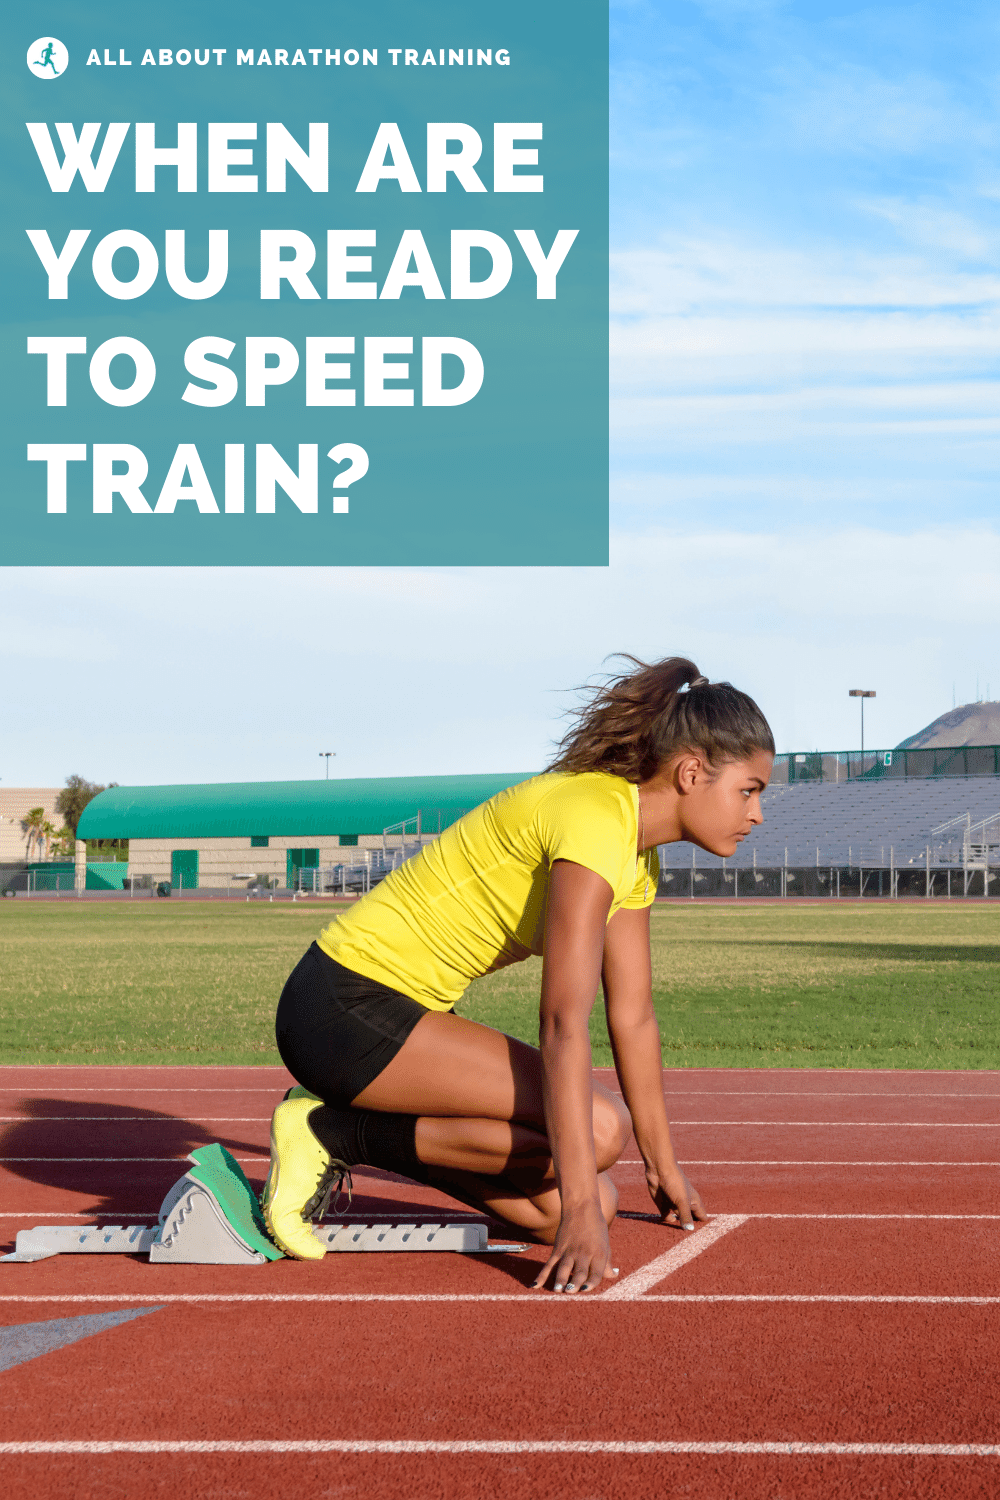 How and Why to Do a Speed Segment in Marathon Training